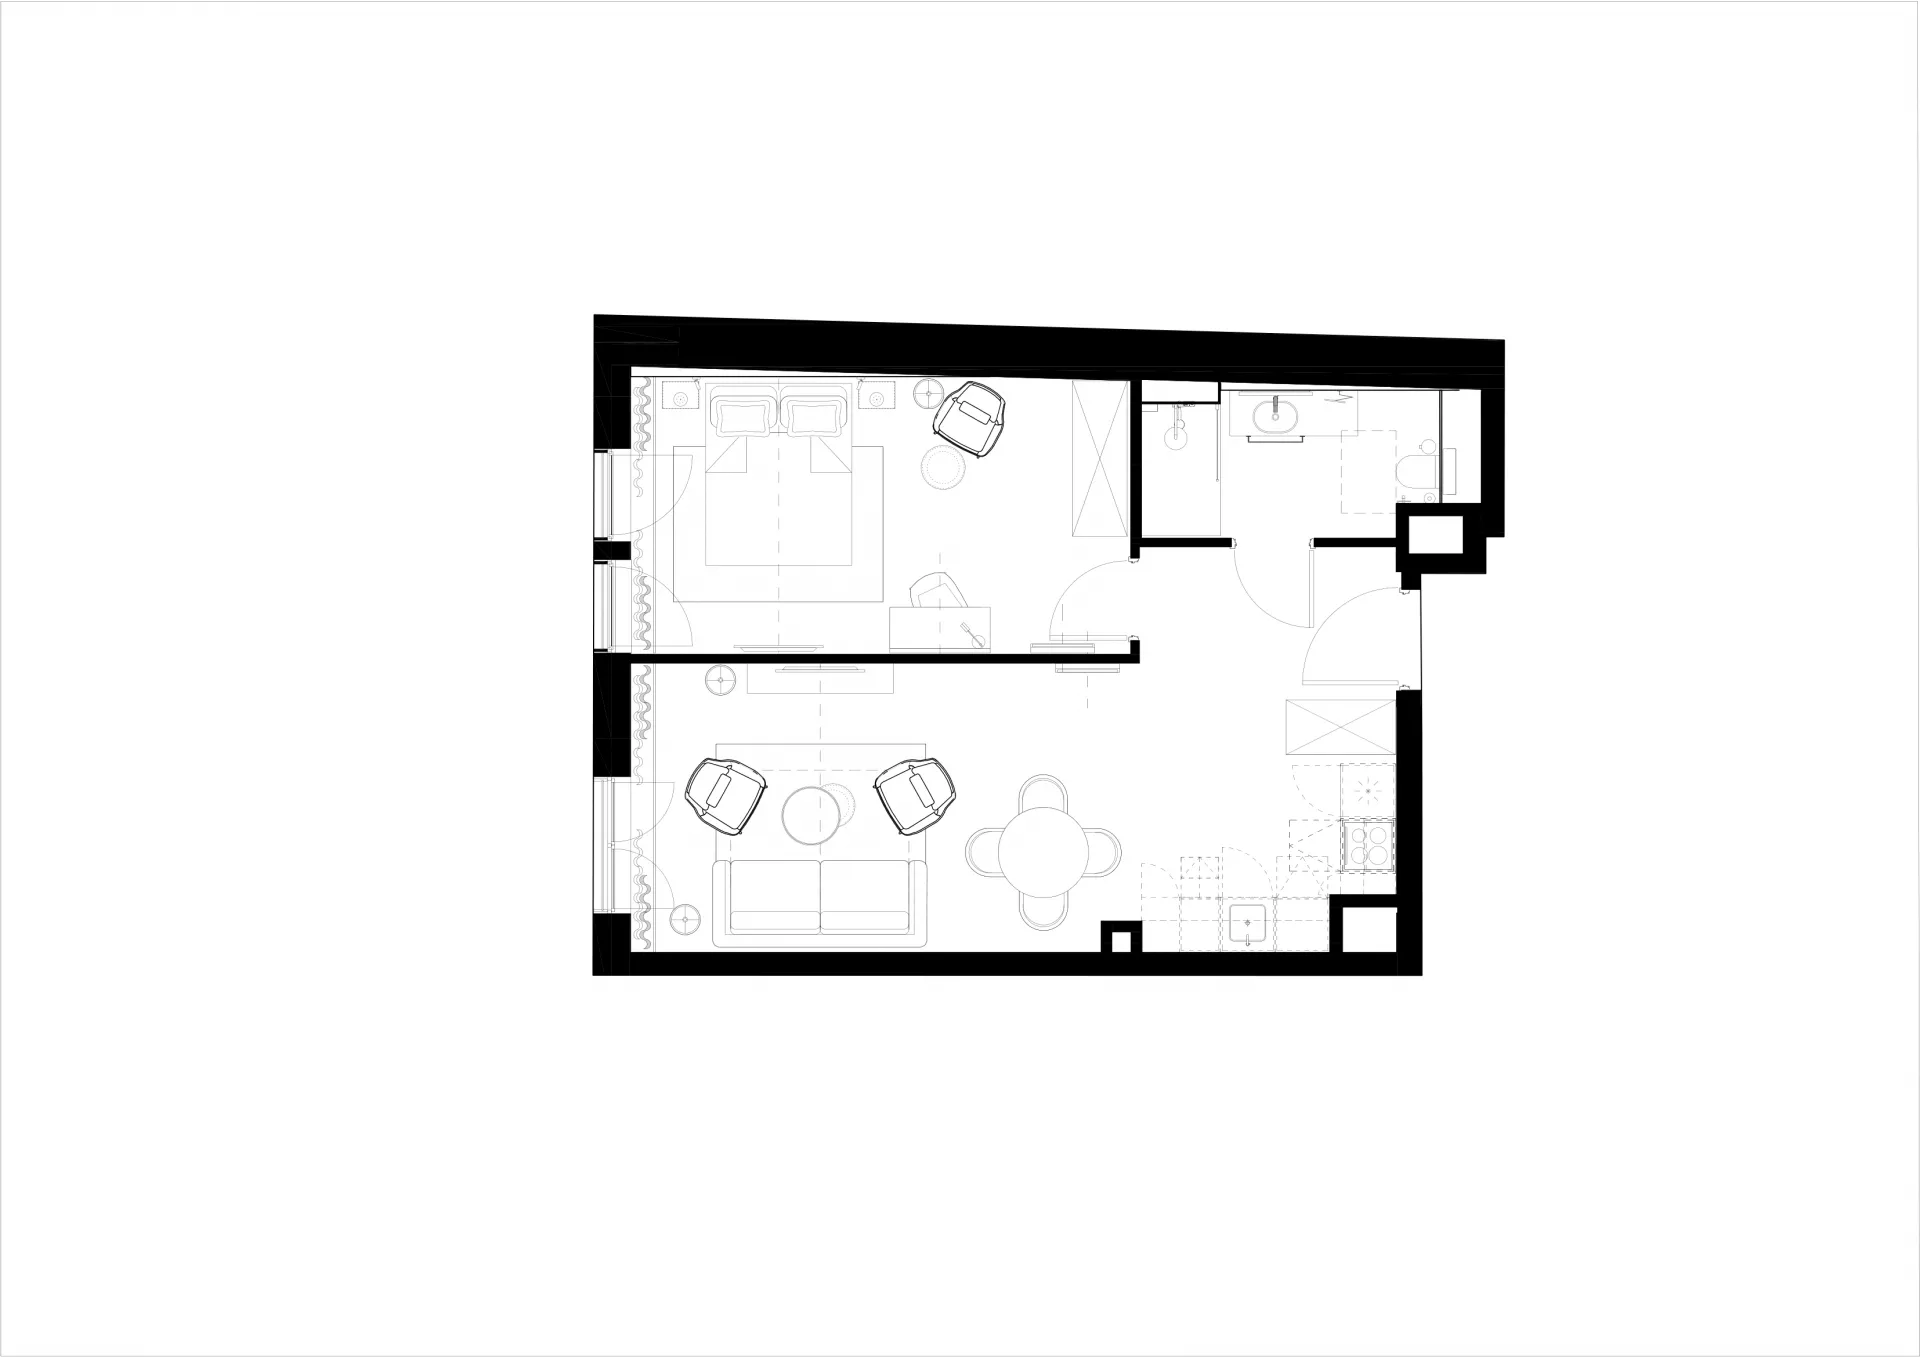 A high standard 1-bedroom apartment in the heart of Kazimierz - plan